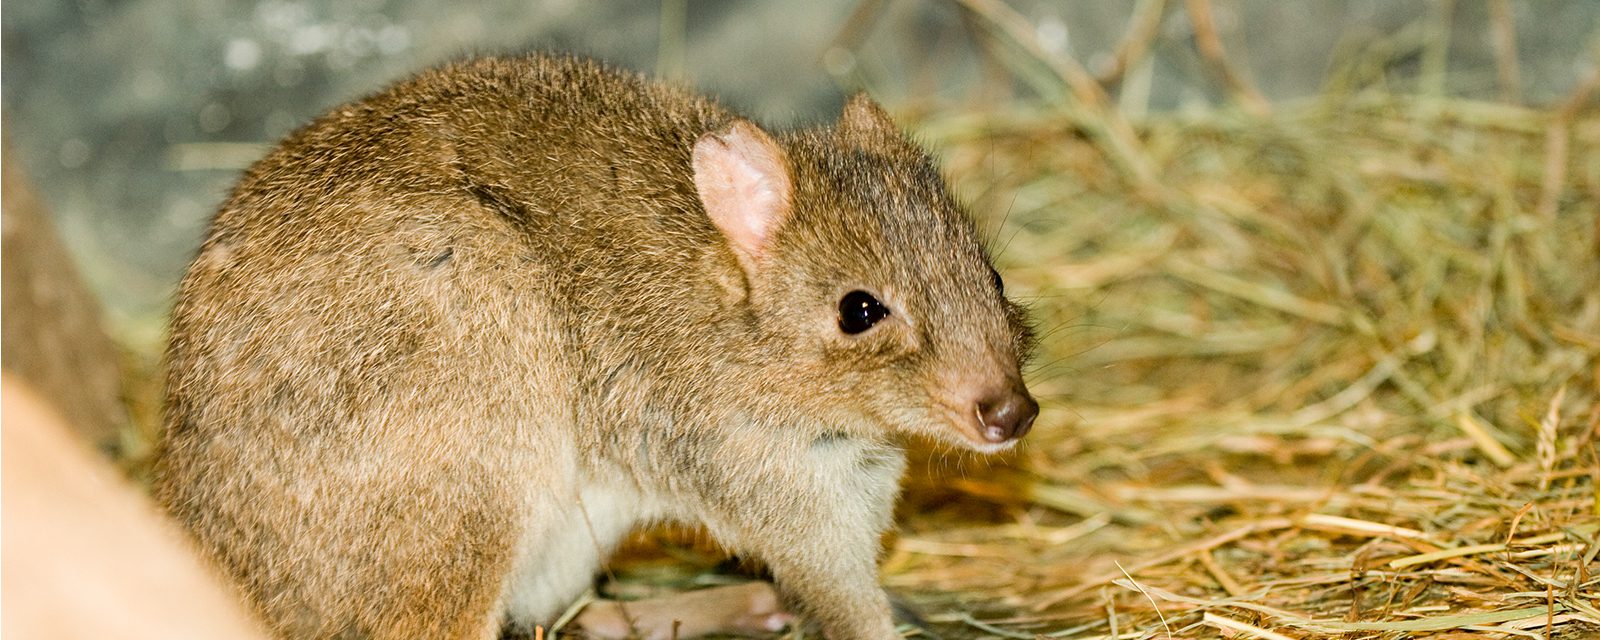 Brush-tailed bettong in exhibit